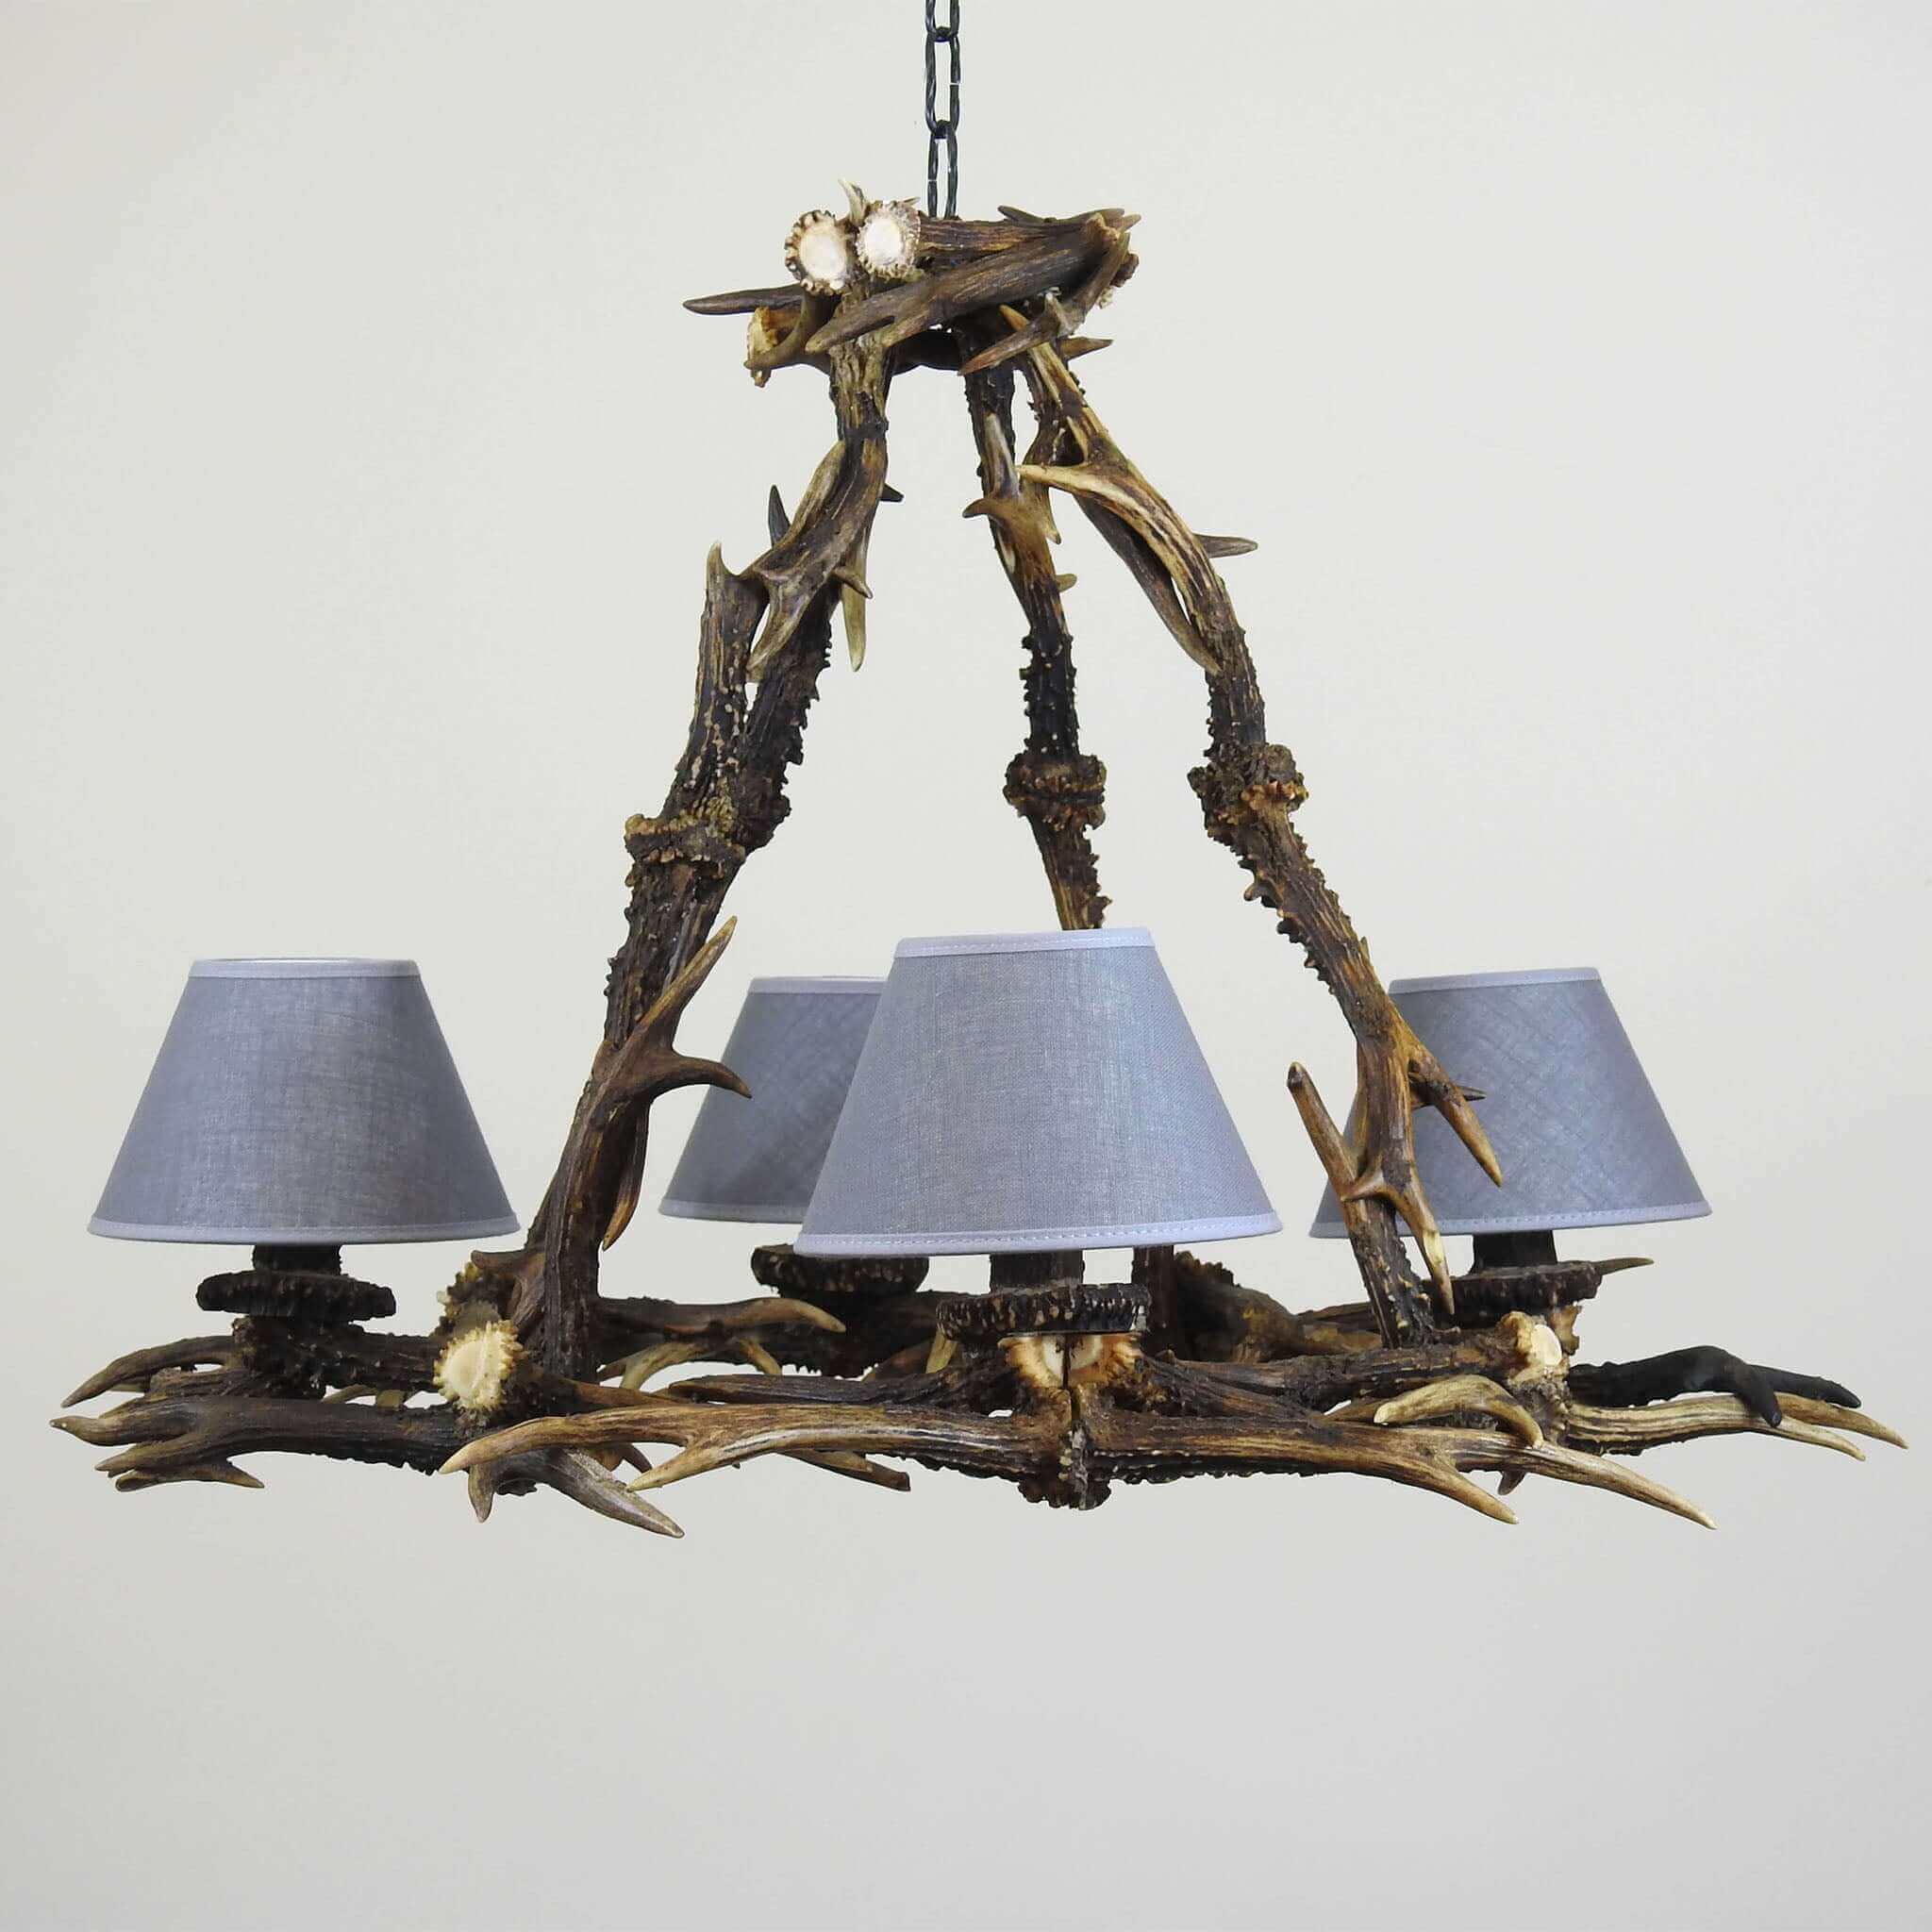 Real antler chandelier for 4 lights with grey shades.